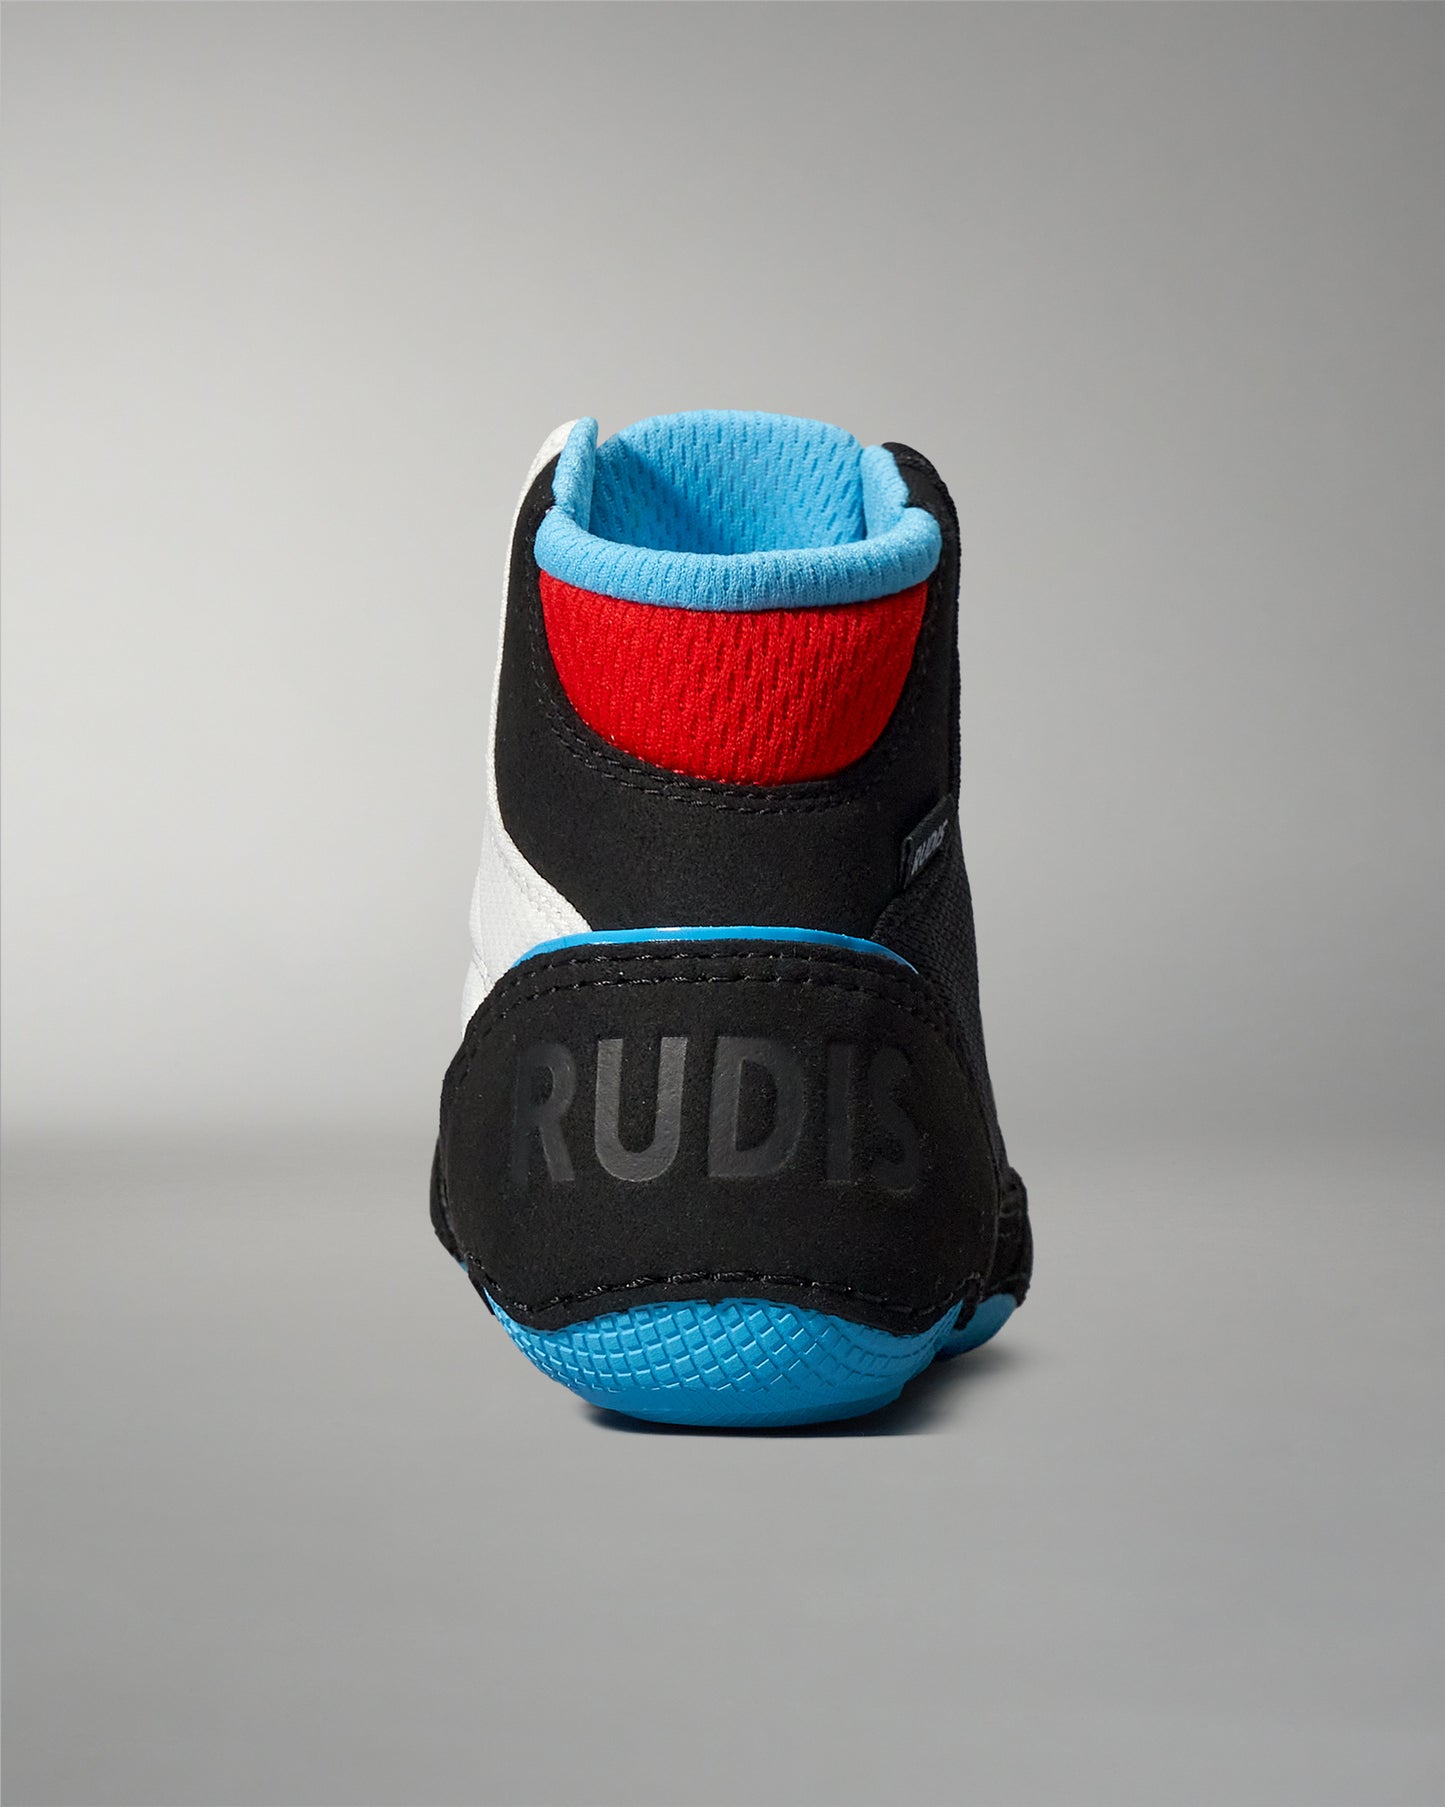 RUDIS Colt 3.0 Youth Wrestling Shoes - Freestyle